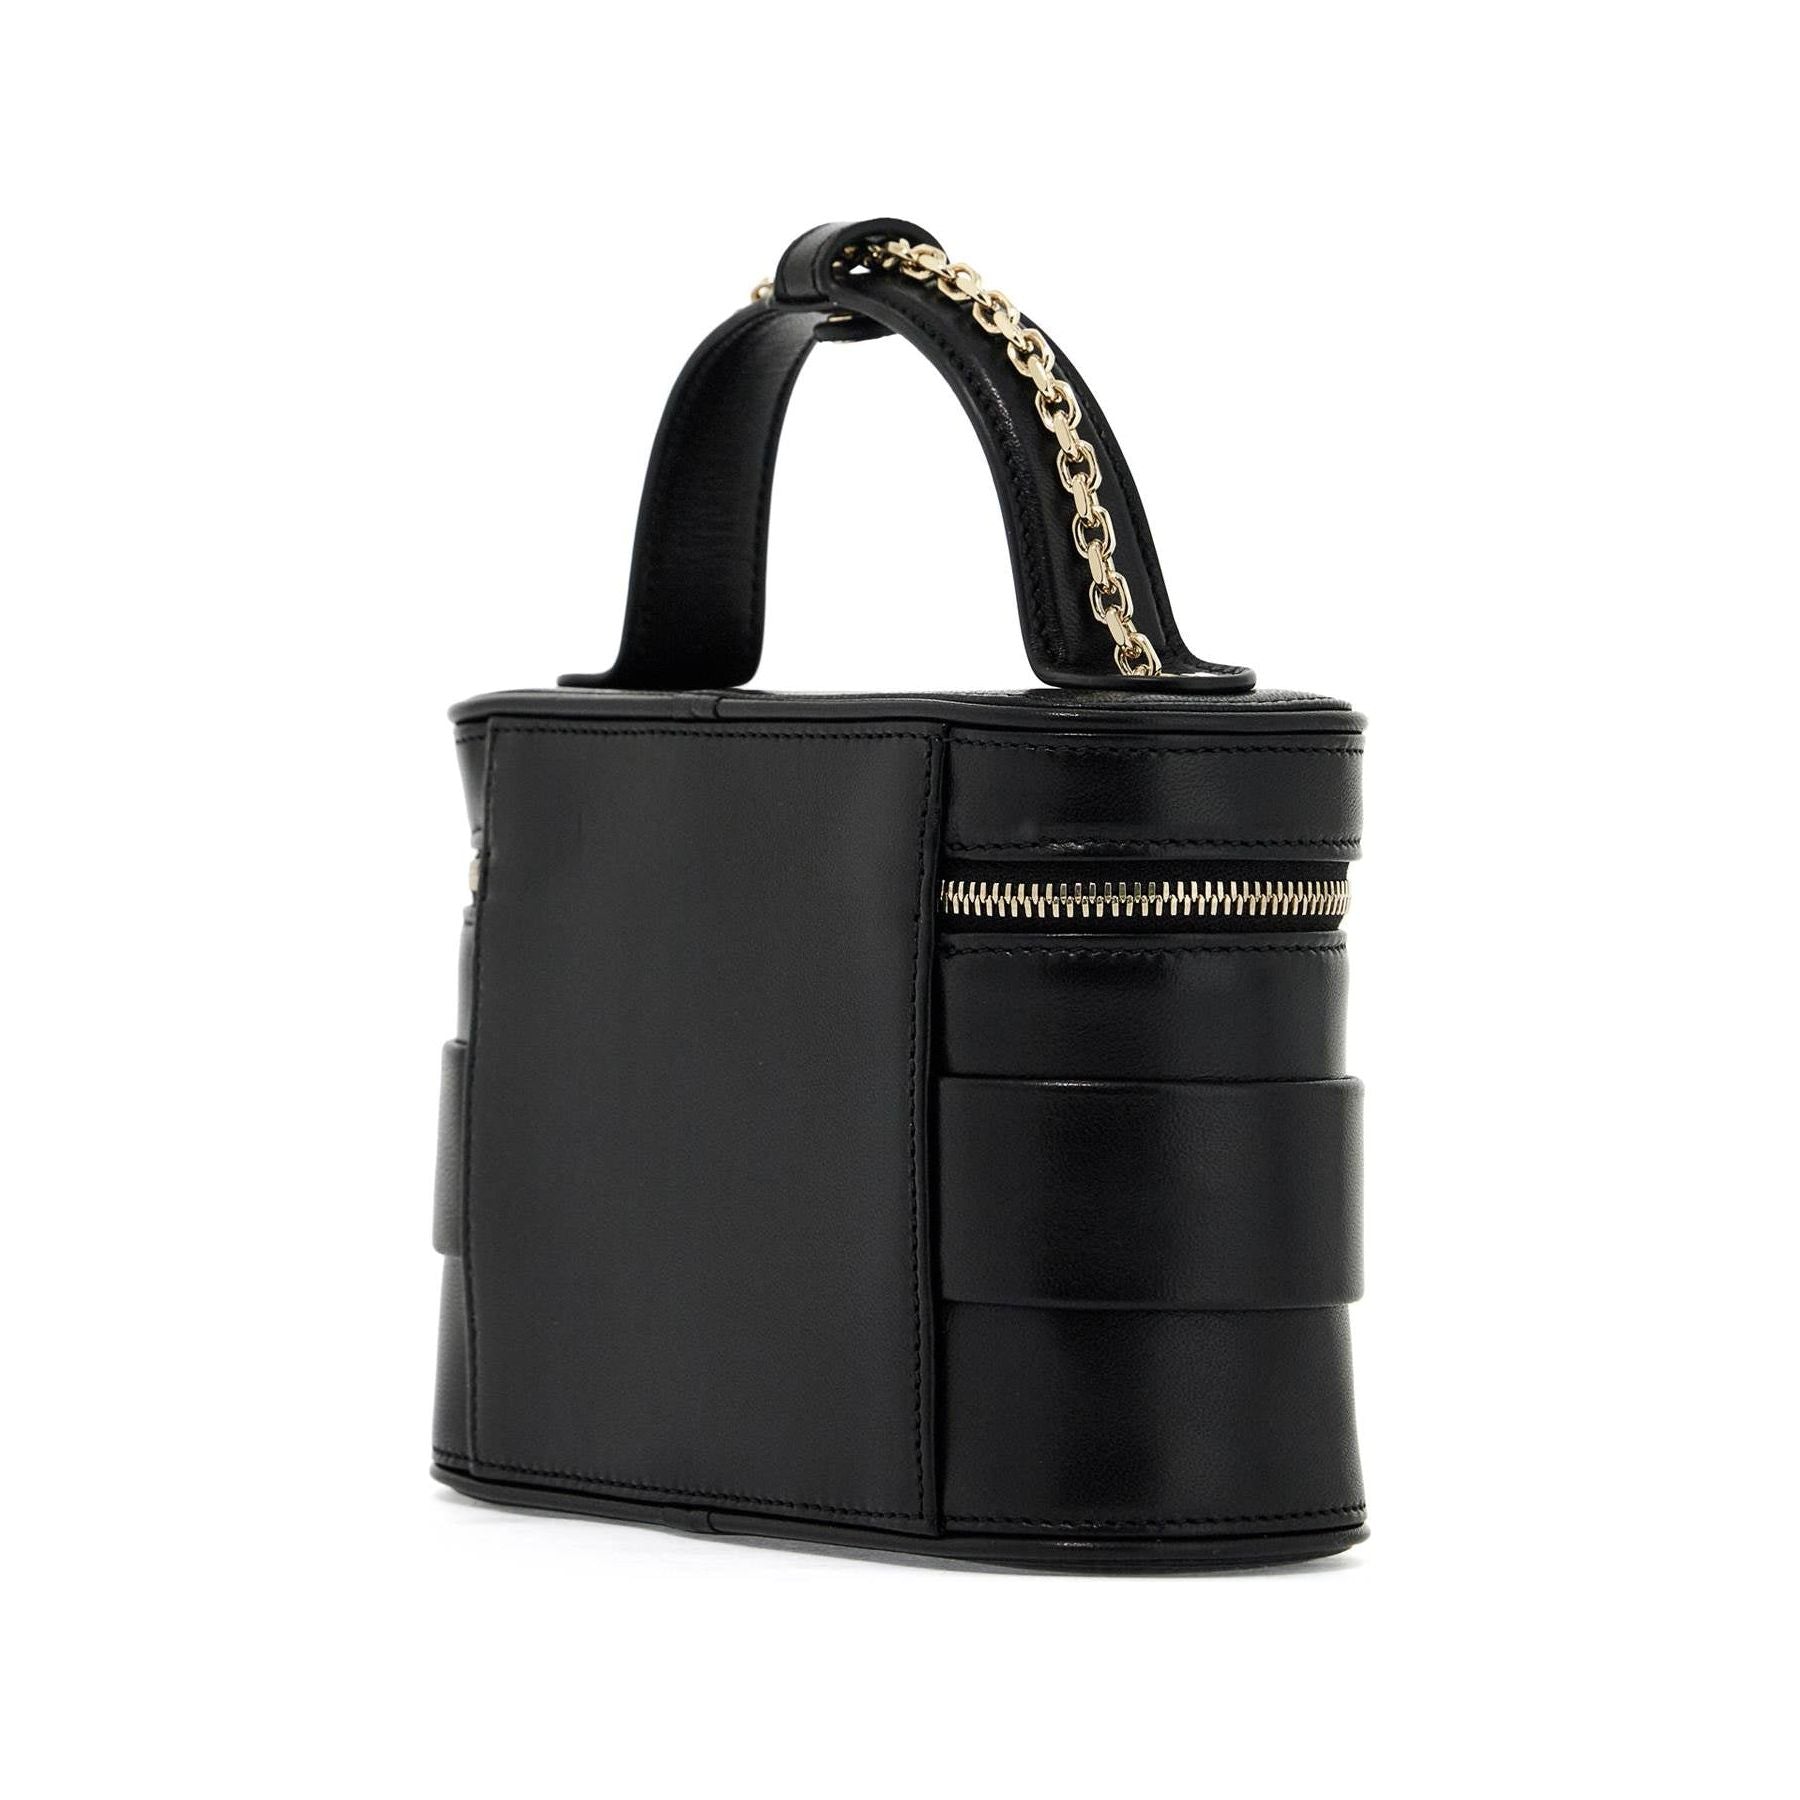 Nappa Leather Vanity Strass Buckle Bag